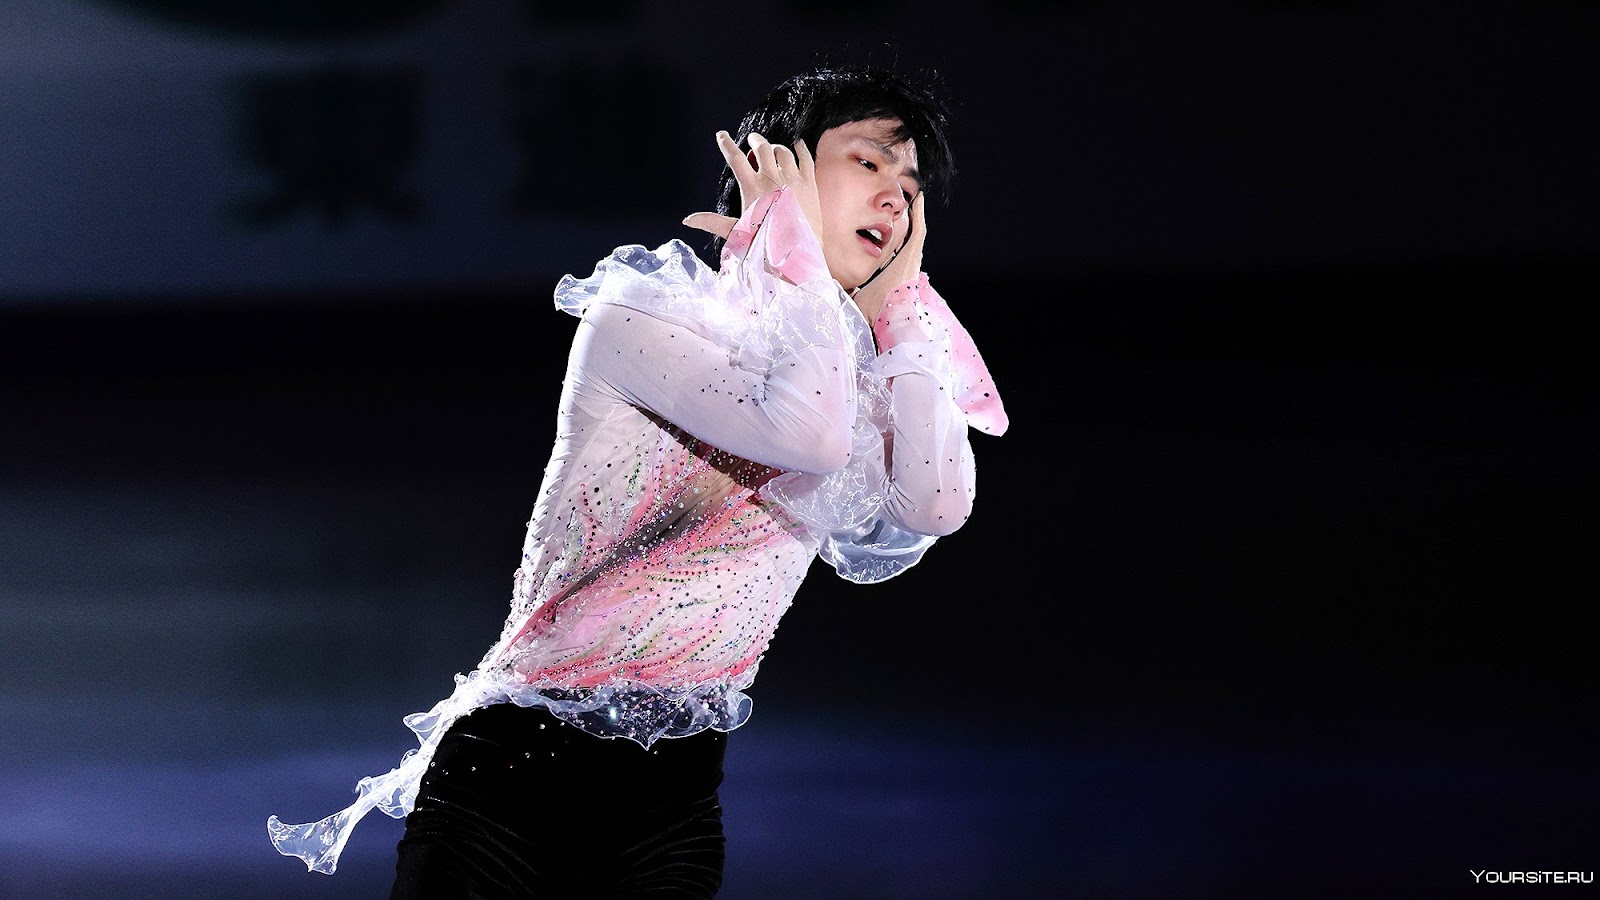 Yuzuru's new Ice show Notte Stellata will be held at Sekisui Heim Super  Arena in Miyagi for 3 consecutive days (March 10/11 /12.) Through this show  he wants to send a message